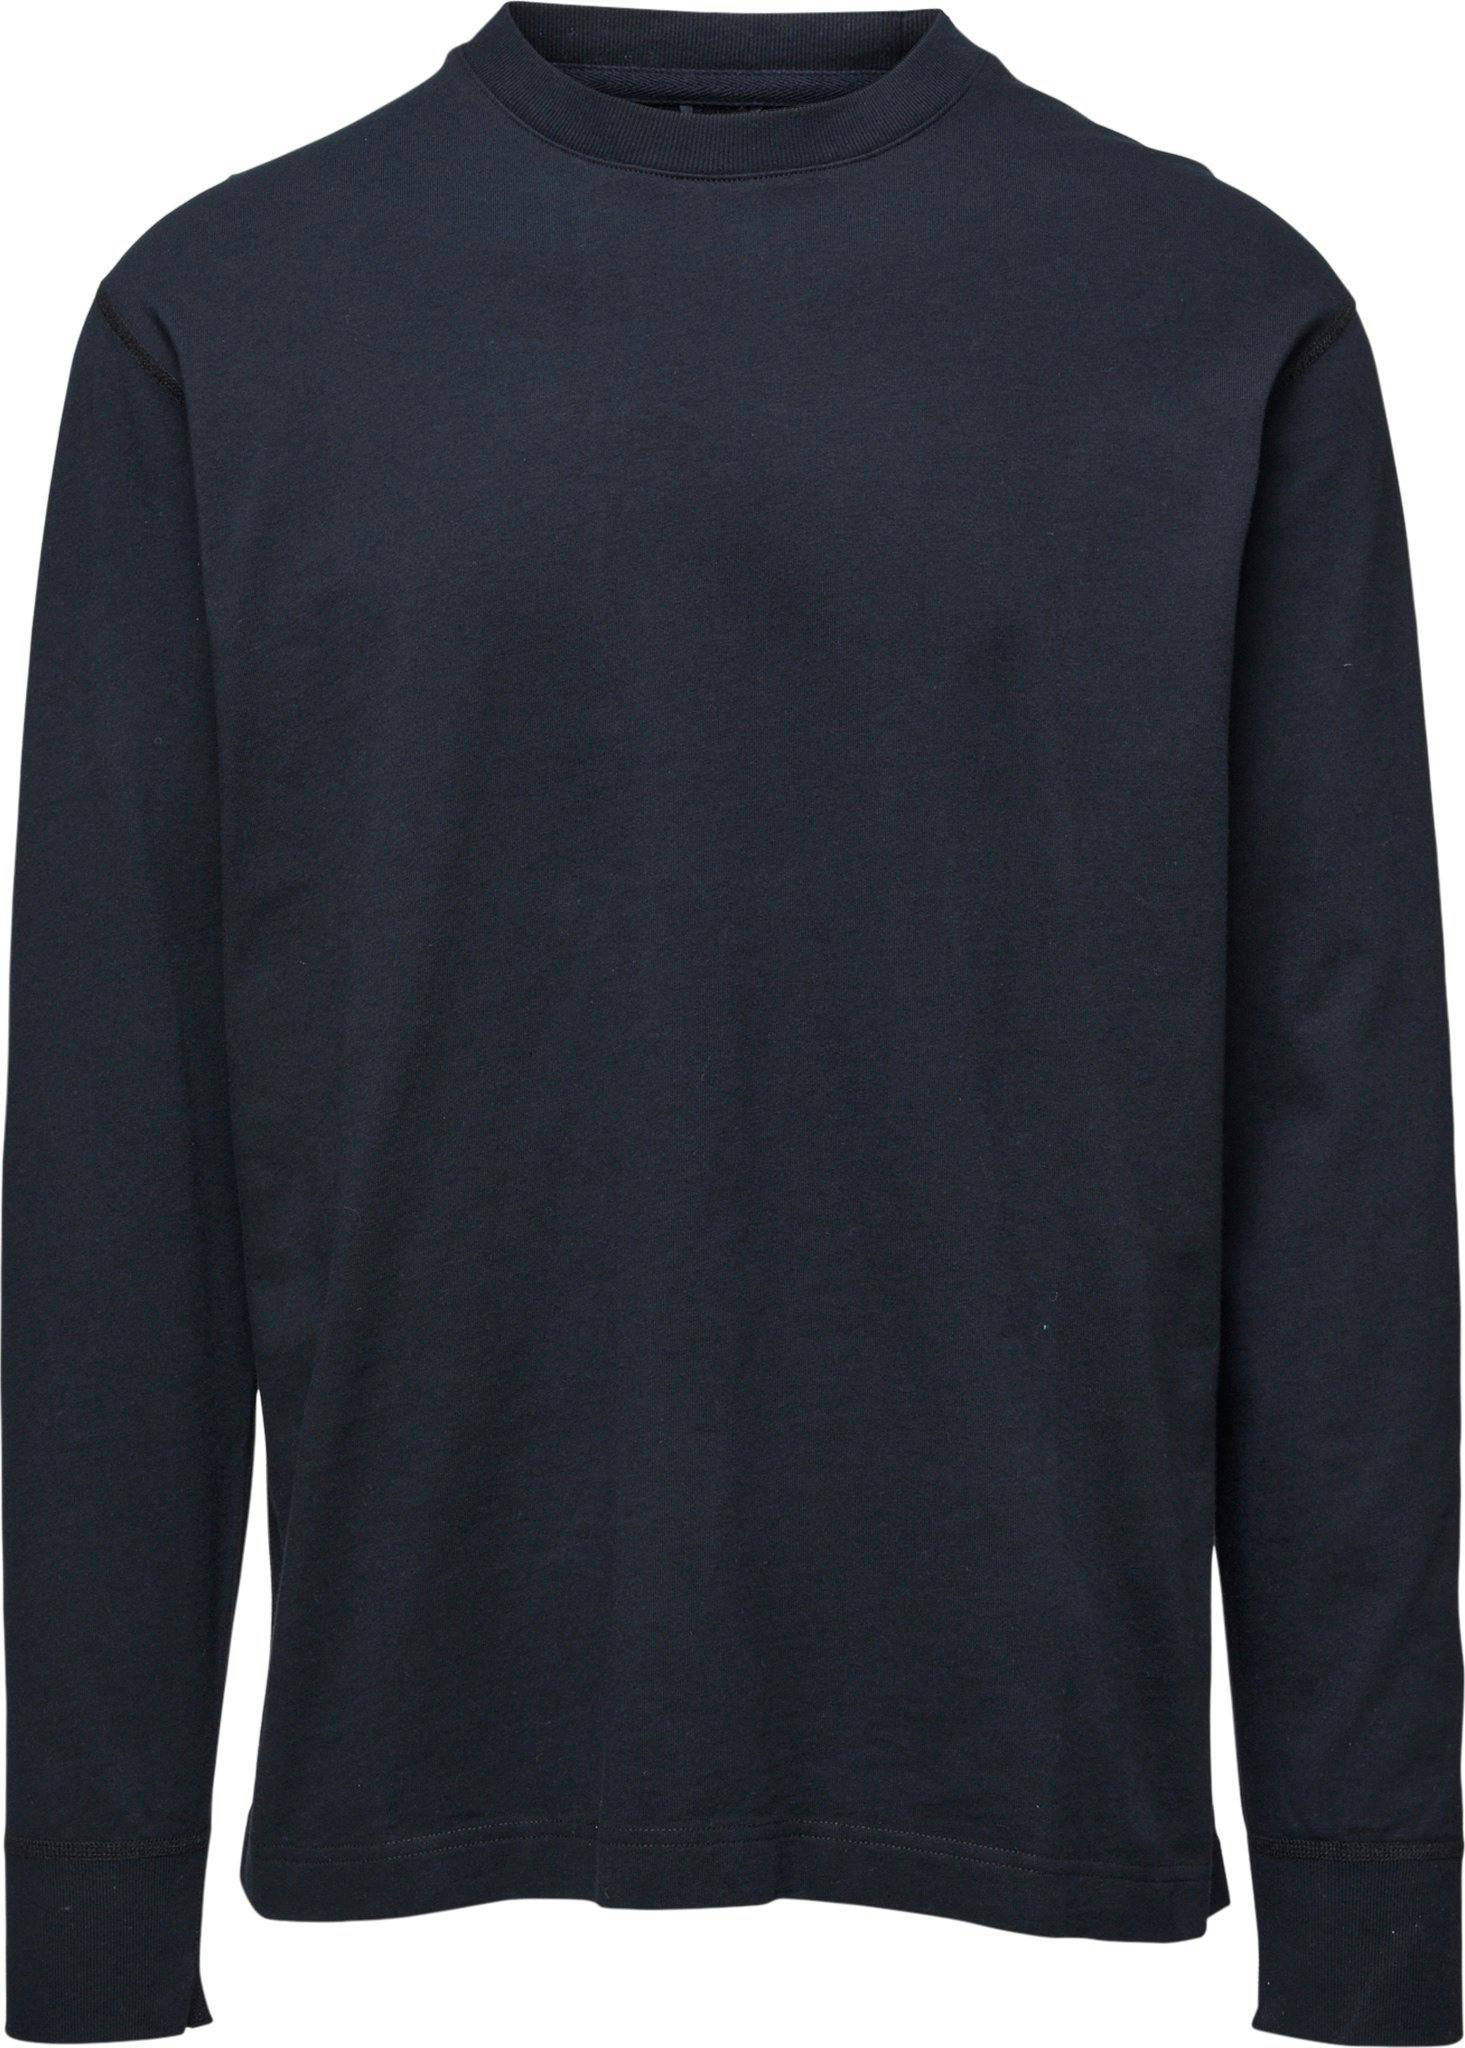 Product image for Midweight Jersey Long Sleeve - Men's